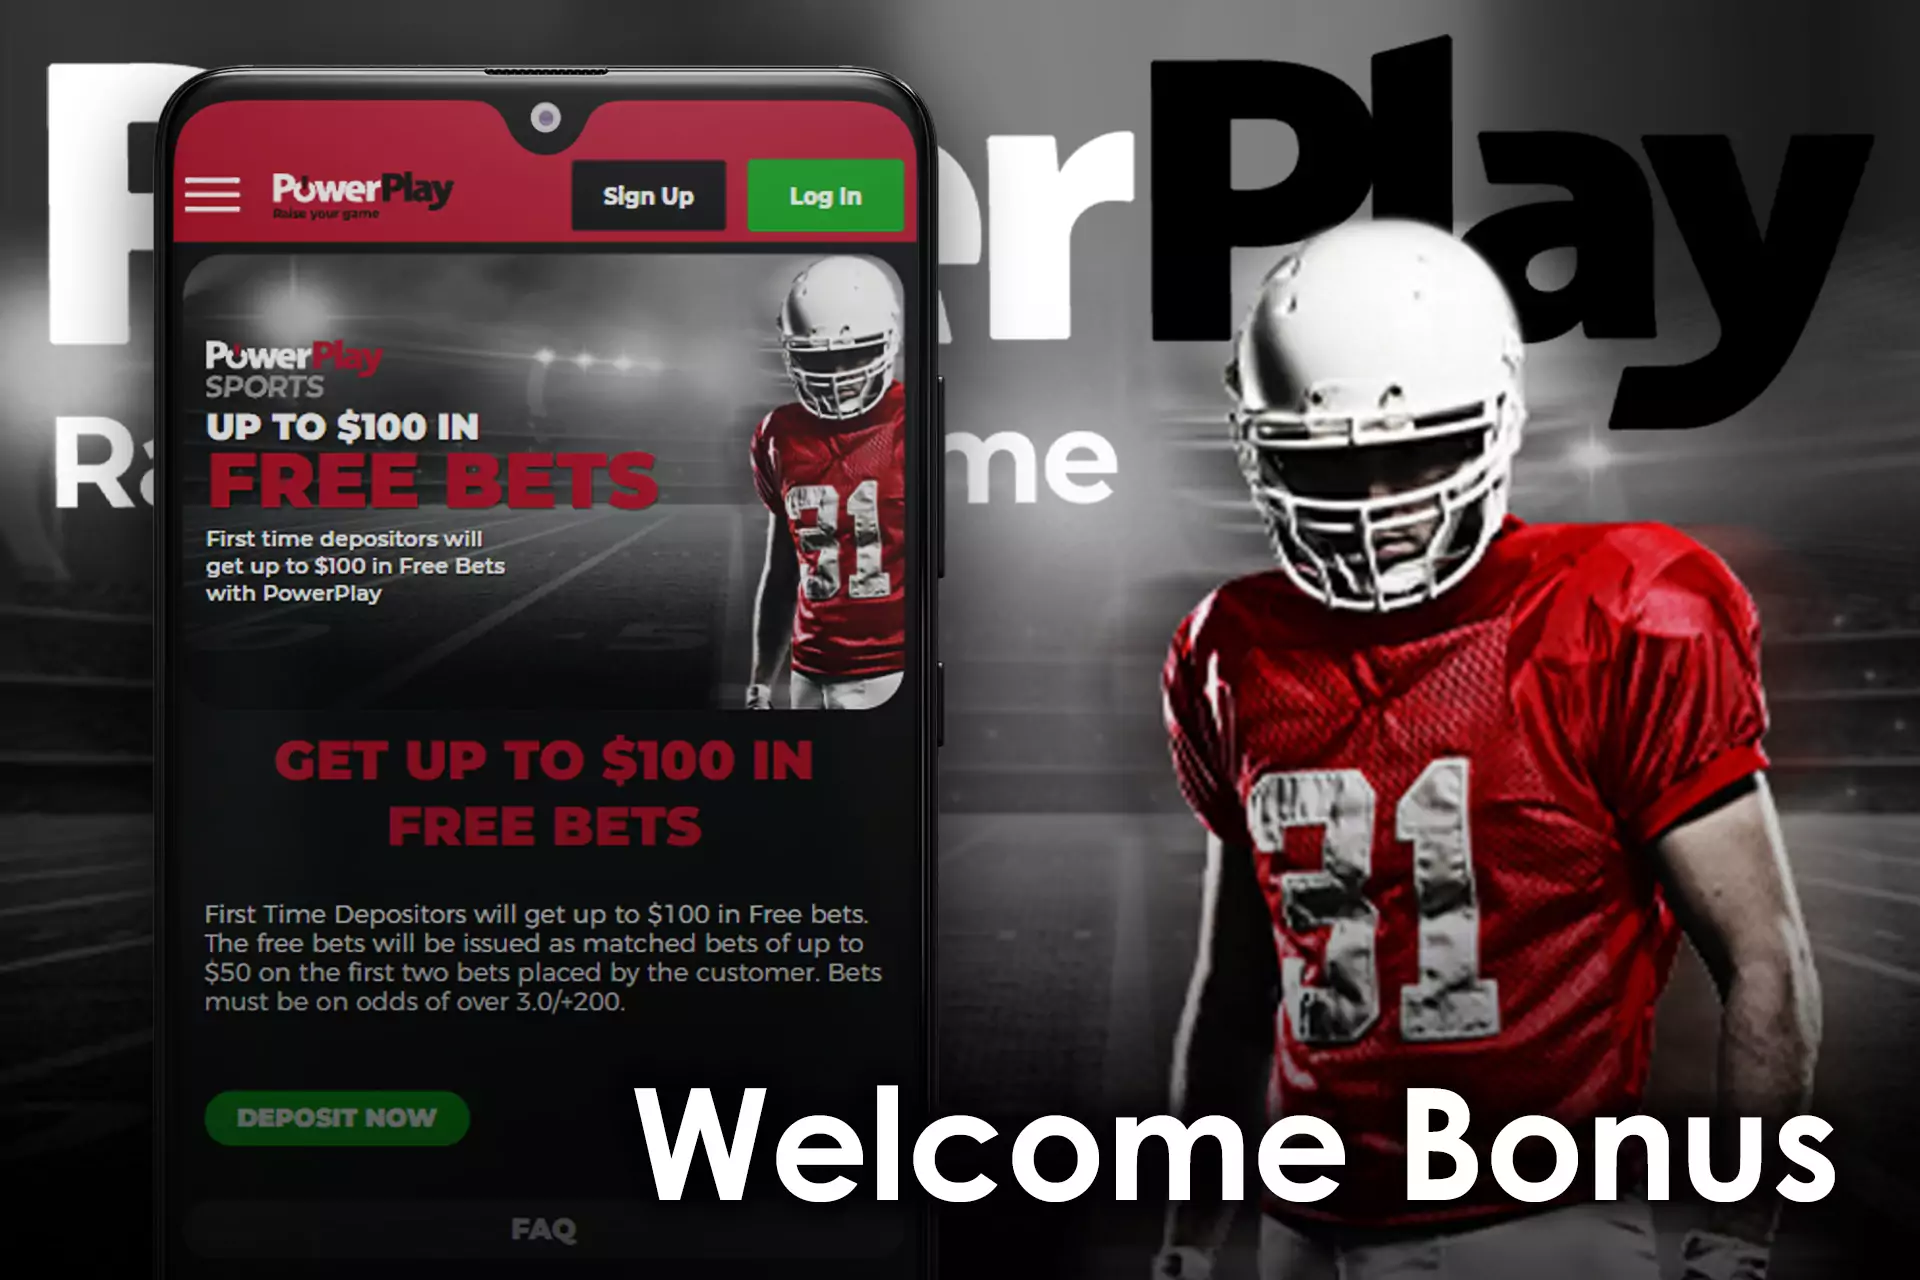 For new users, there is a welcome offer at the Power Play betting site.